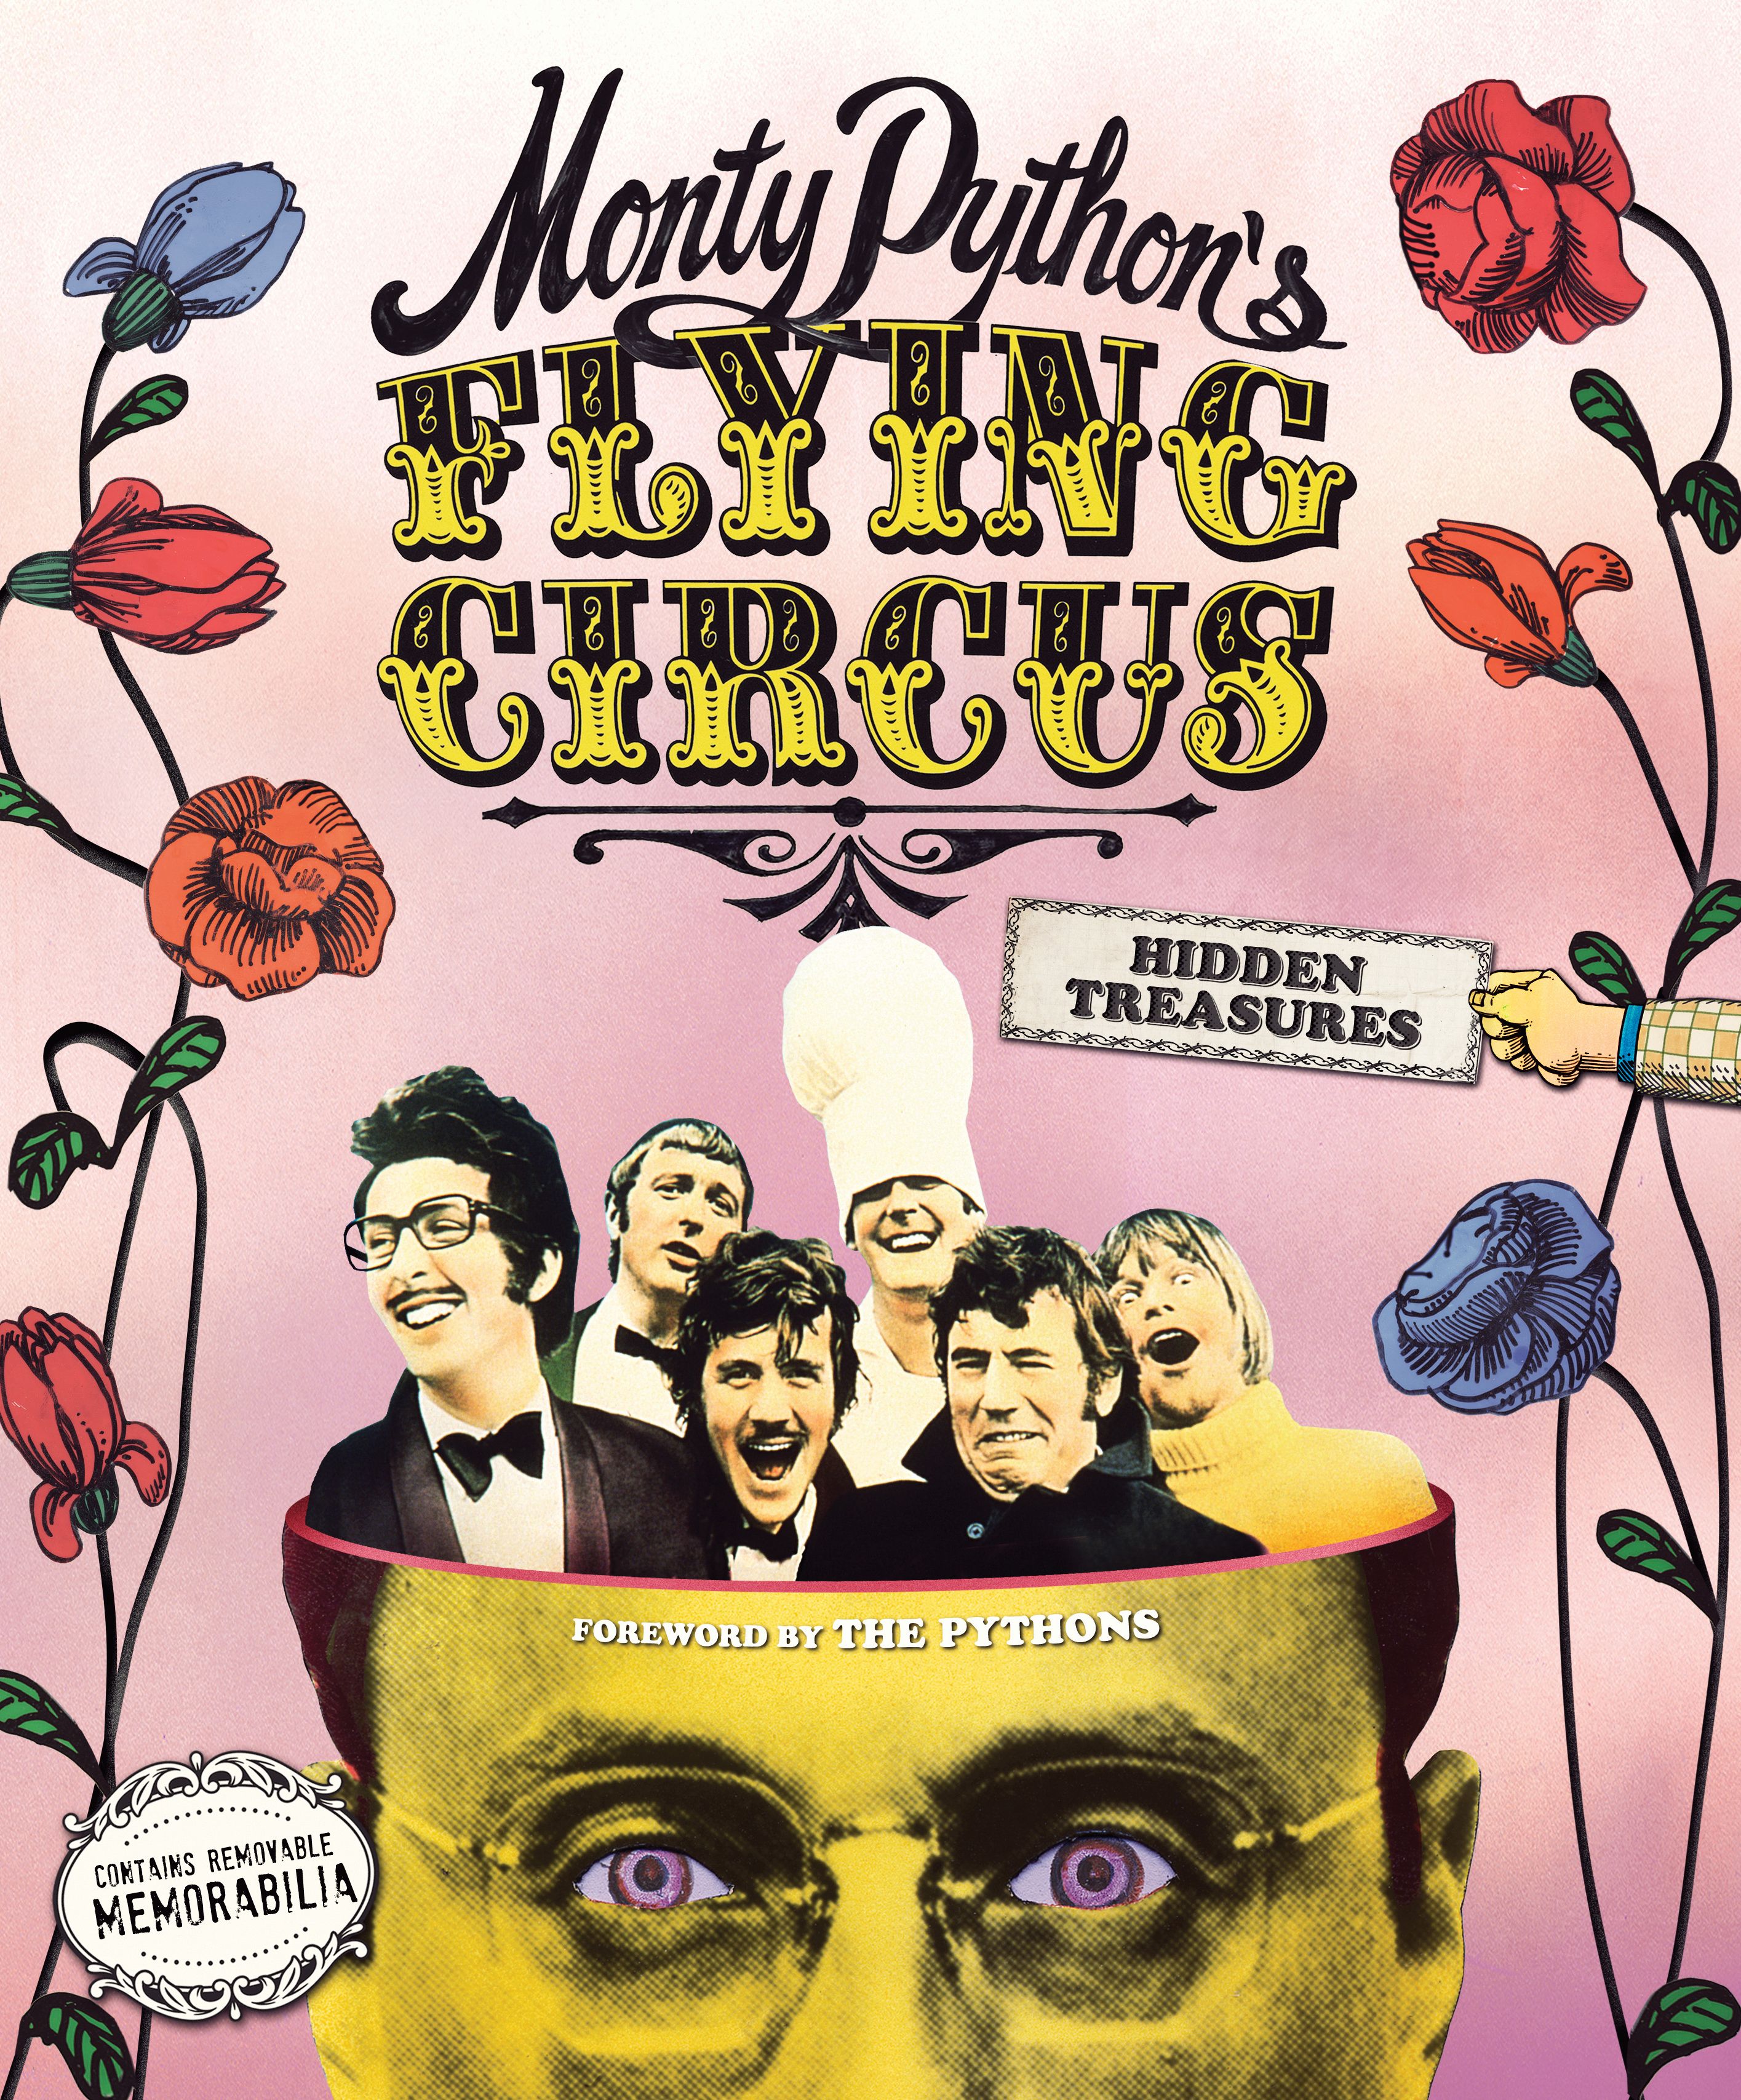 Monty Python The Funniest Joke in the World original  Monty Pythons  The Funniest Joke in the World Flying Circus version from first episide  Aired on BBC One 19691005 Movie version and